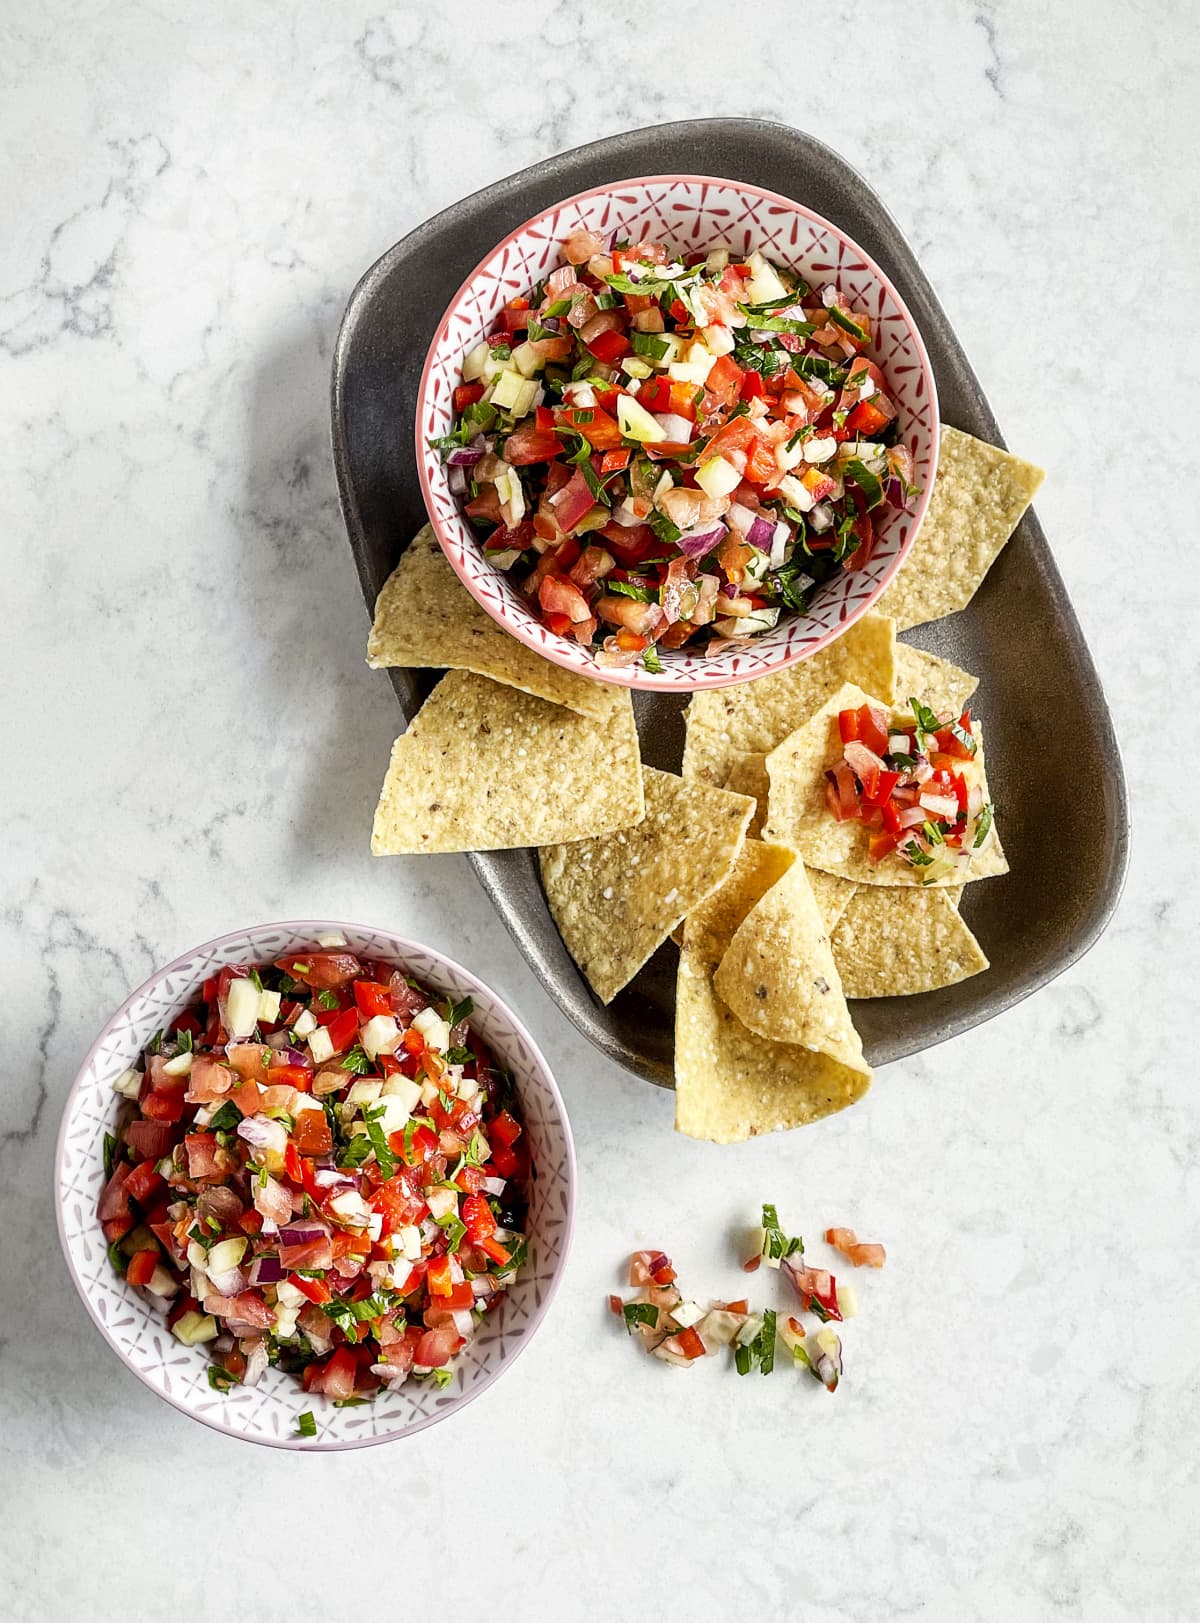 Salsa in bowls with tortilla chips around them on a tray and white surface